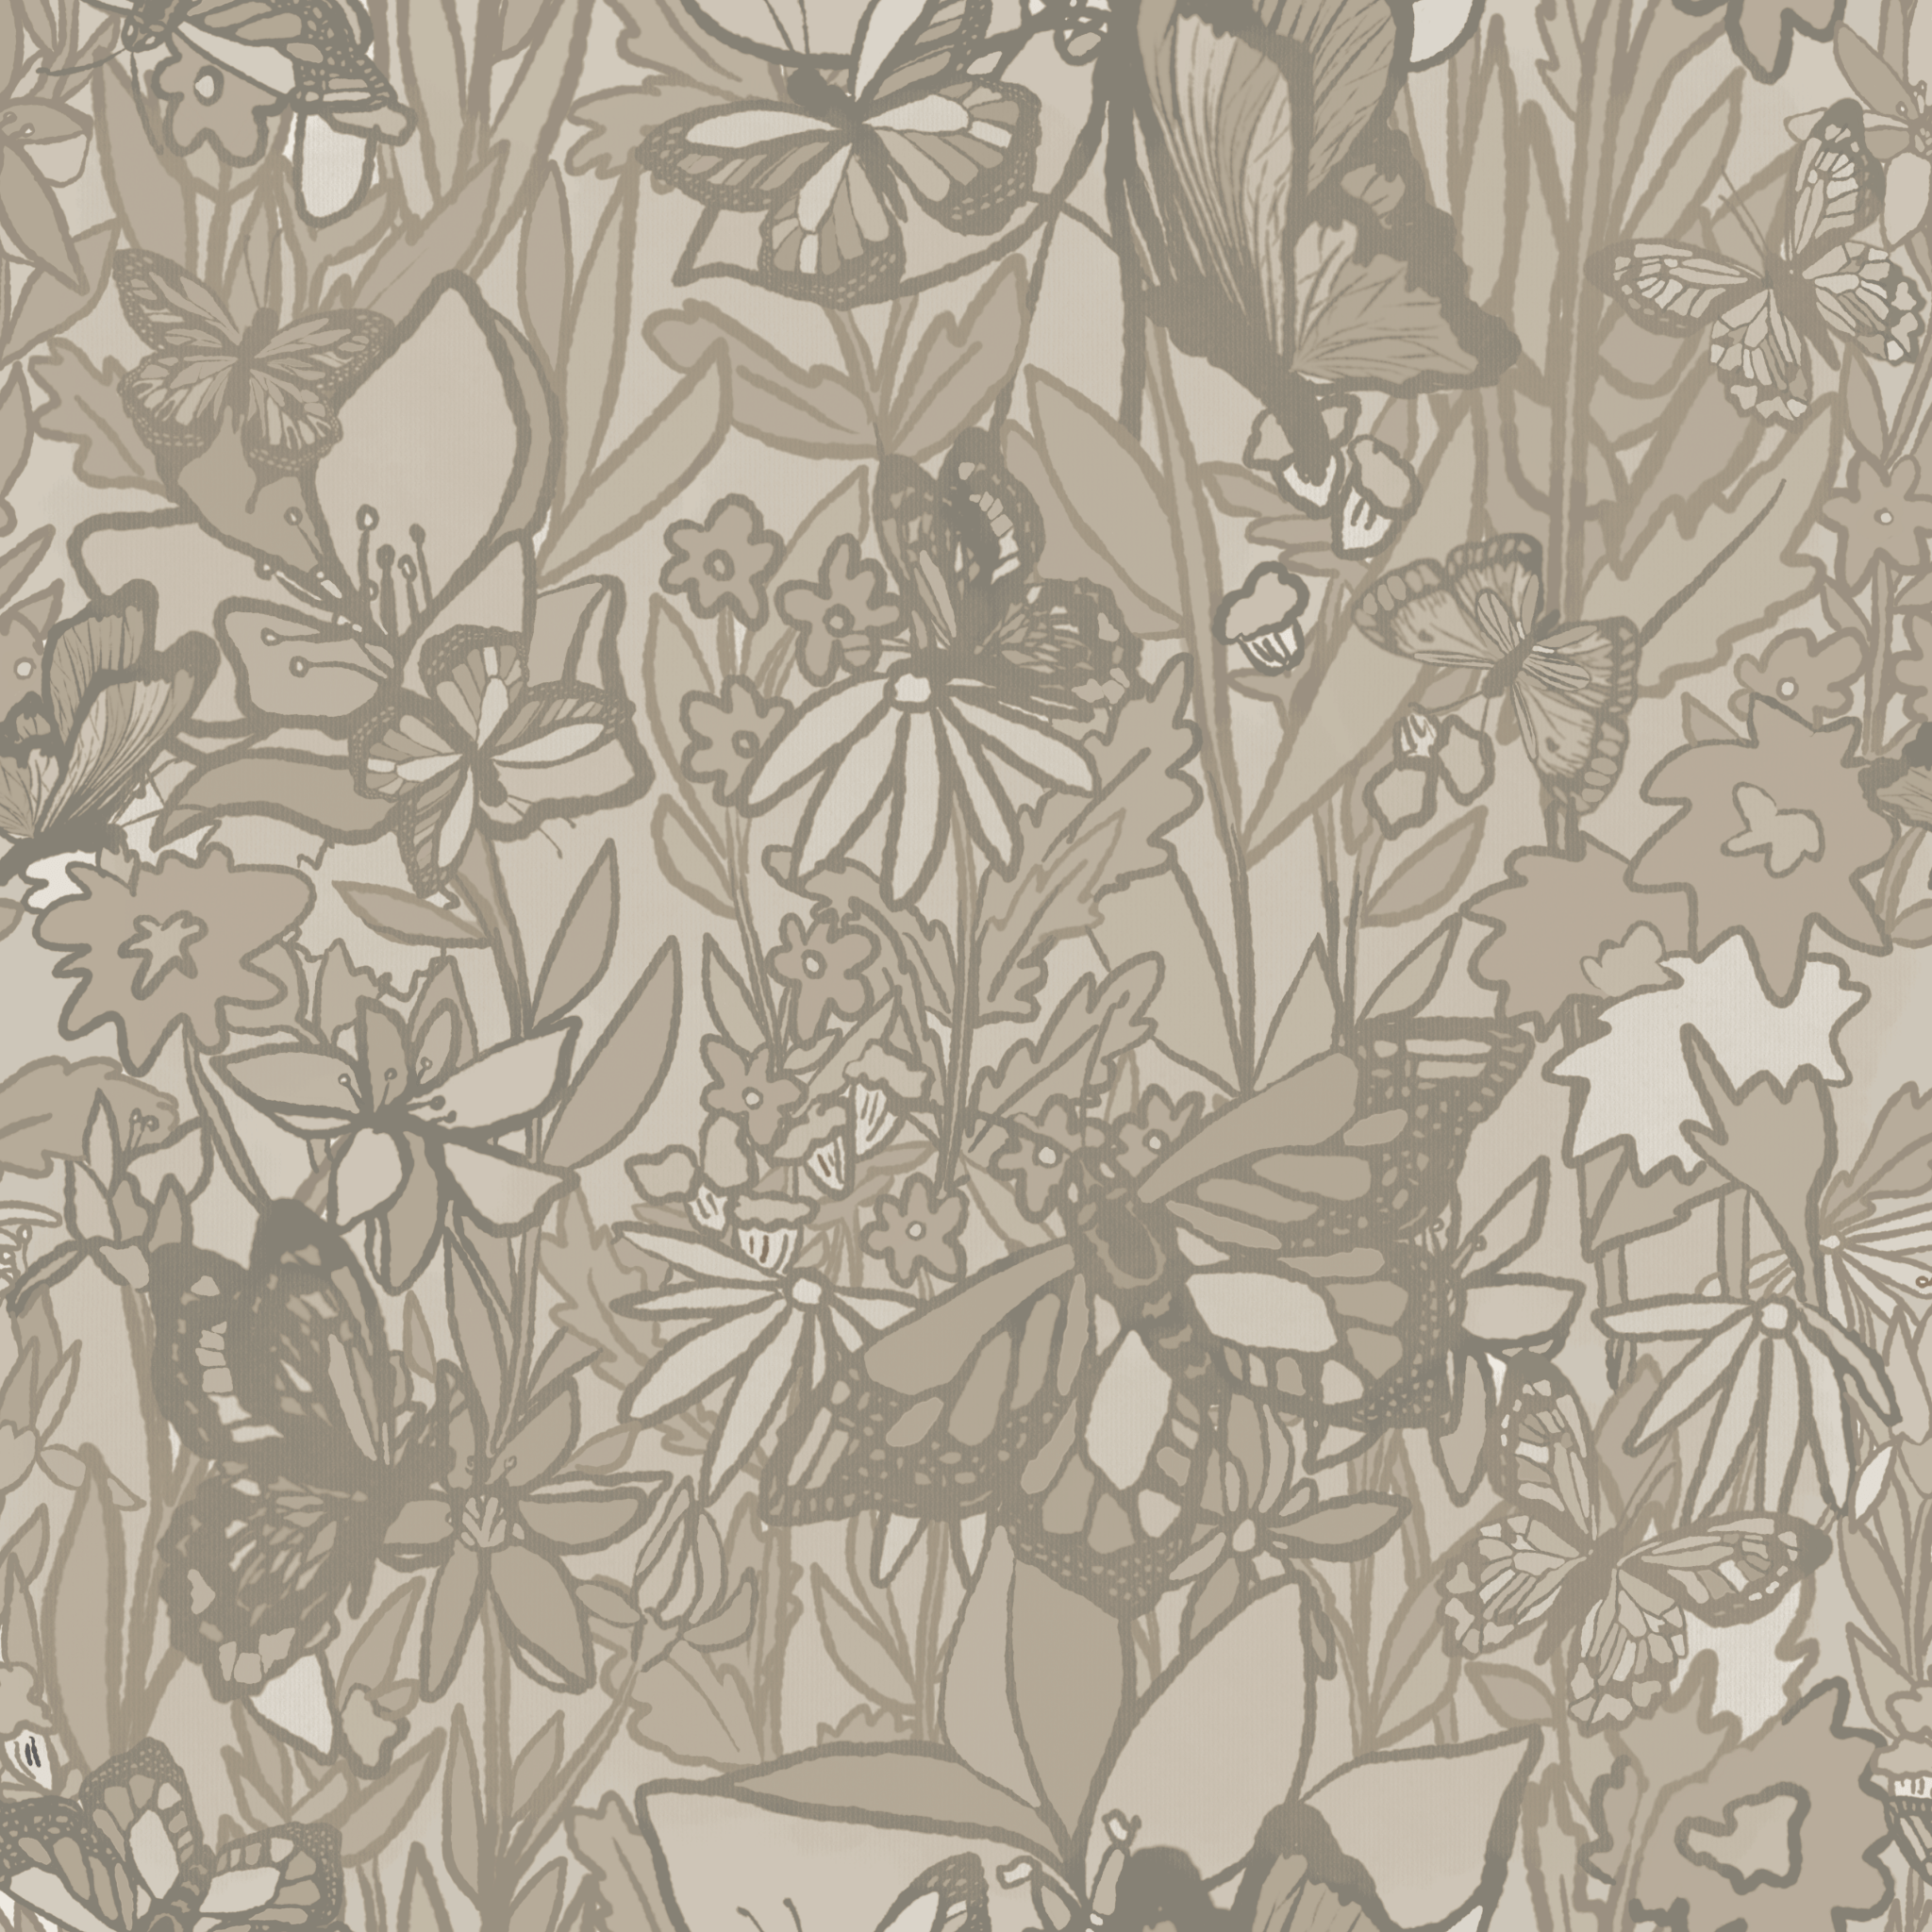 A close-up view of a wallpaper with a delicate pattern of butterflies and floral elements in neutral shades of gray and beige on a soft, light background.